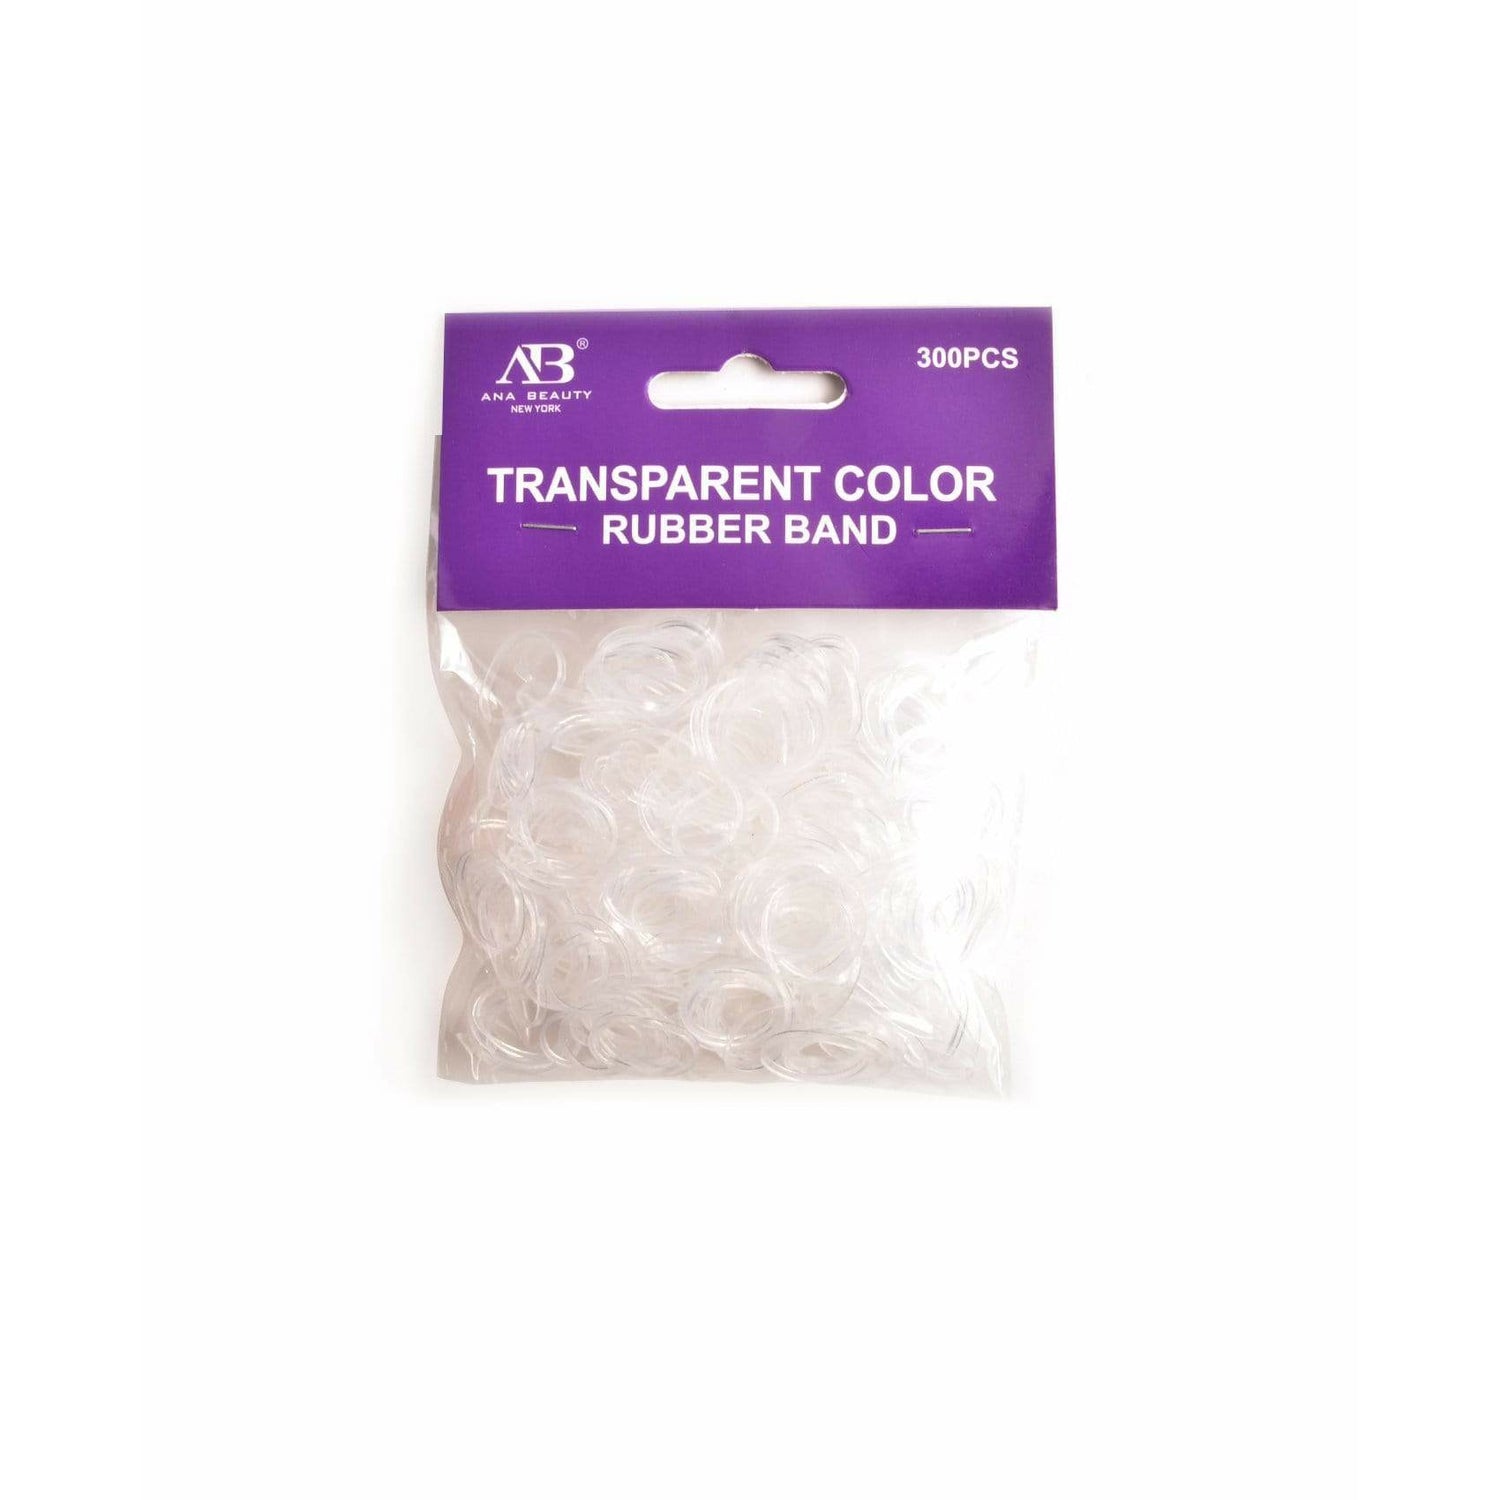 Clear Rubber Bands (Transparent Color Rubber Band) - VIP Extensions